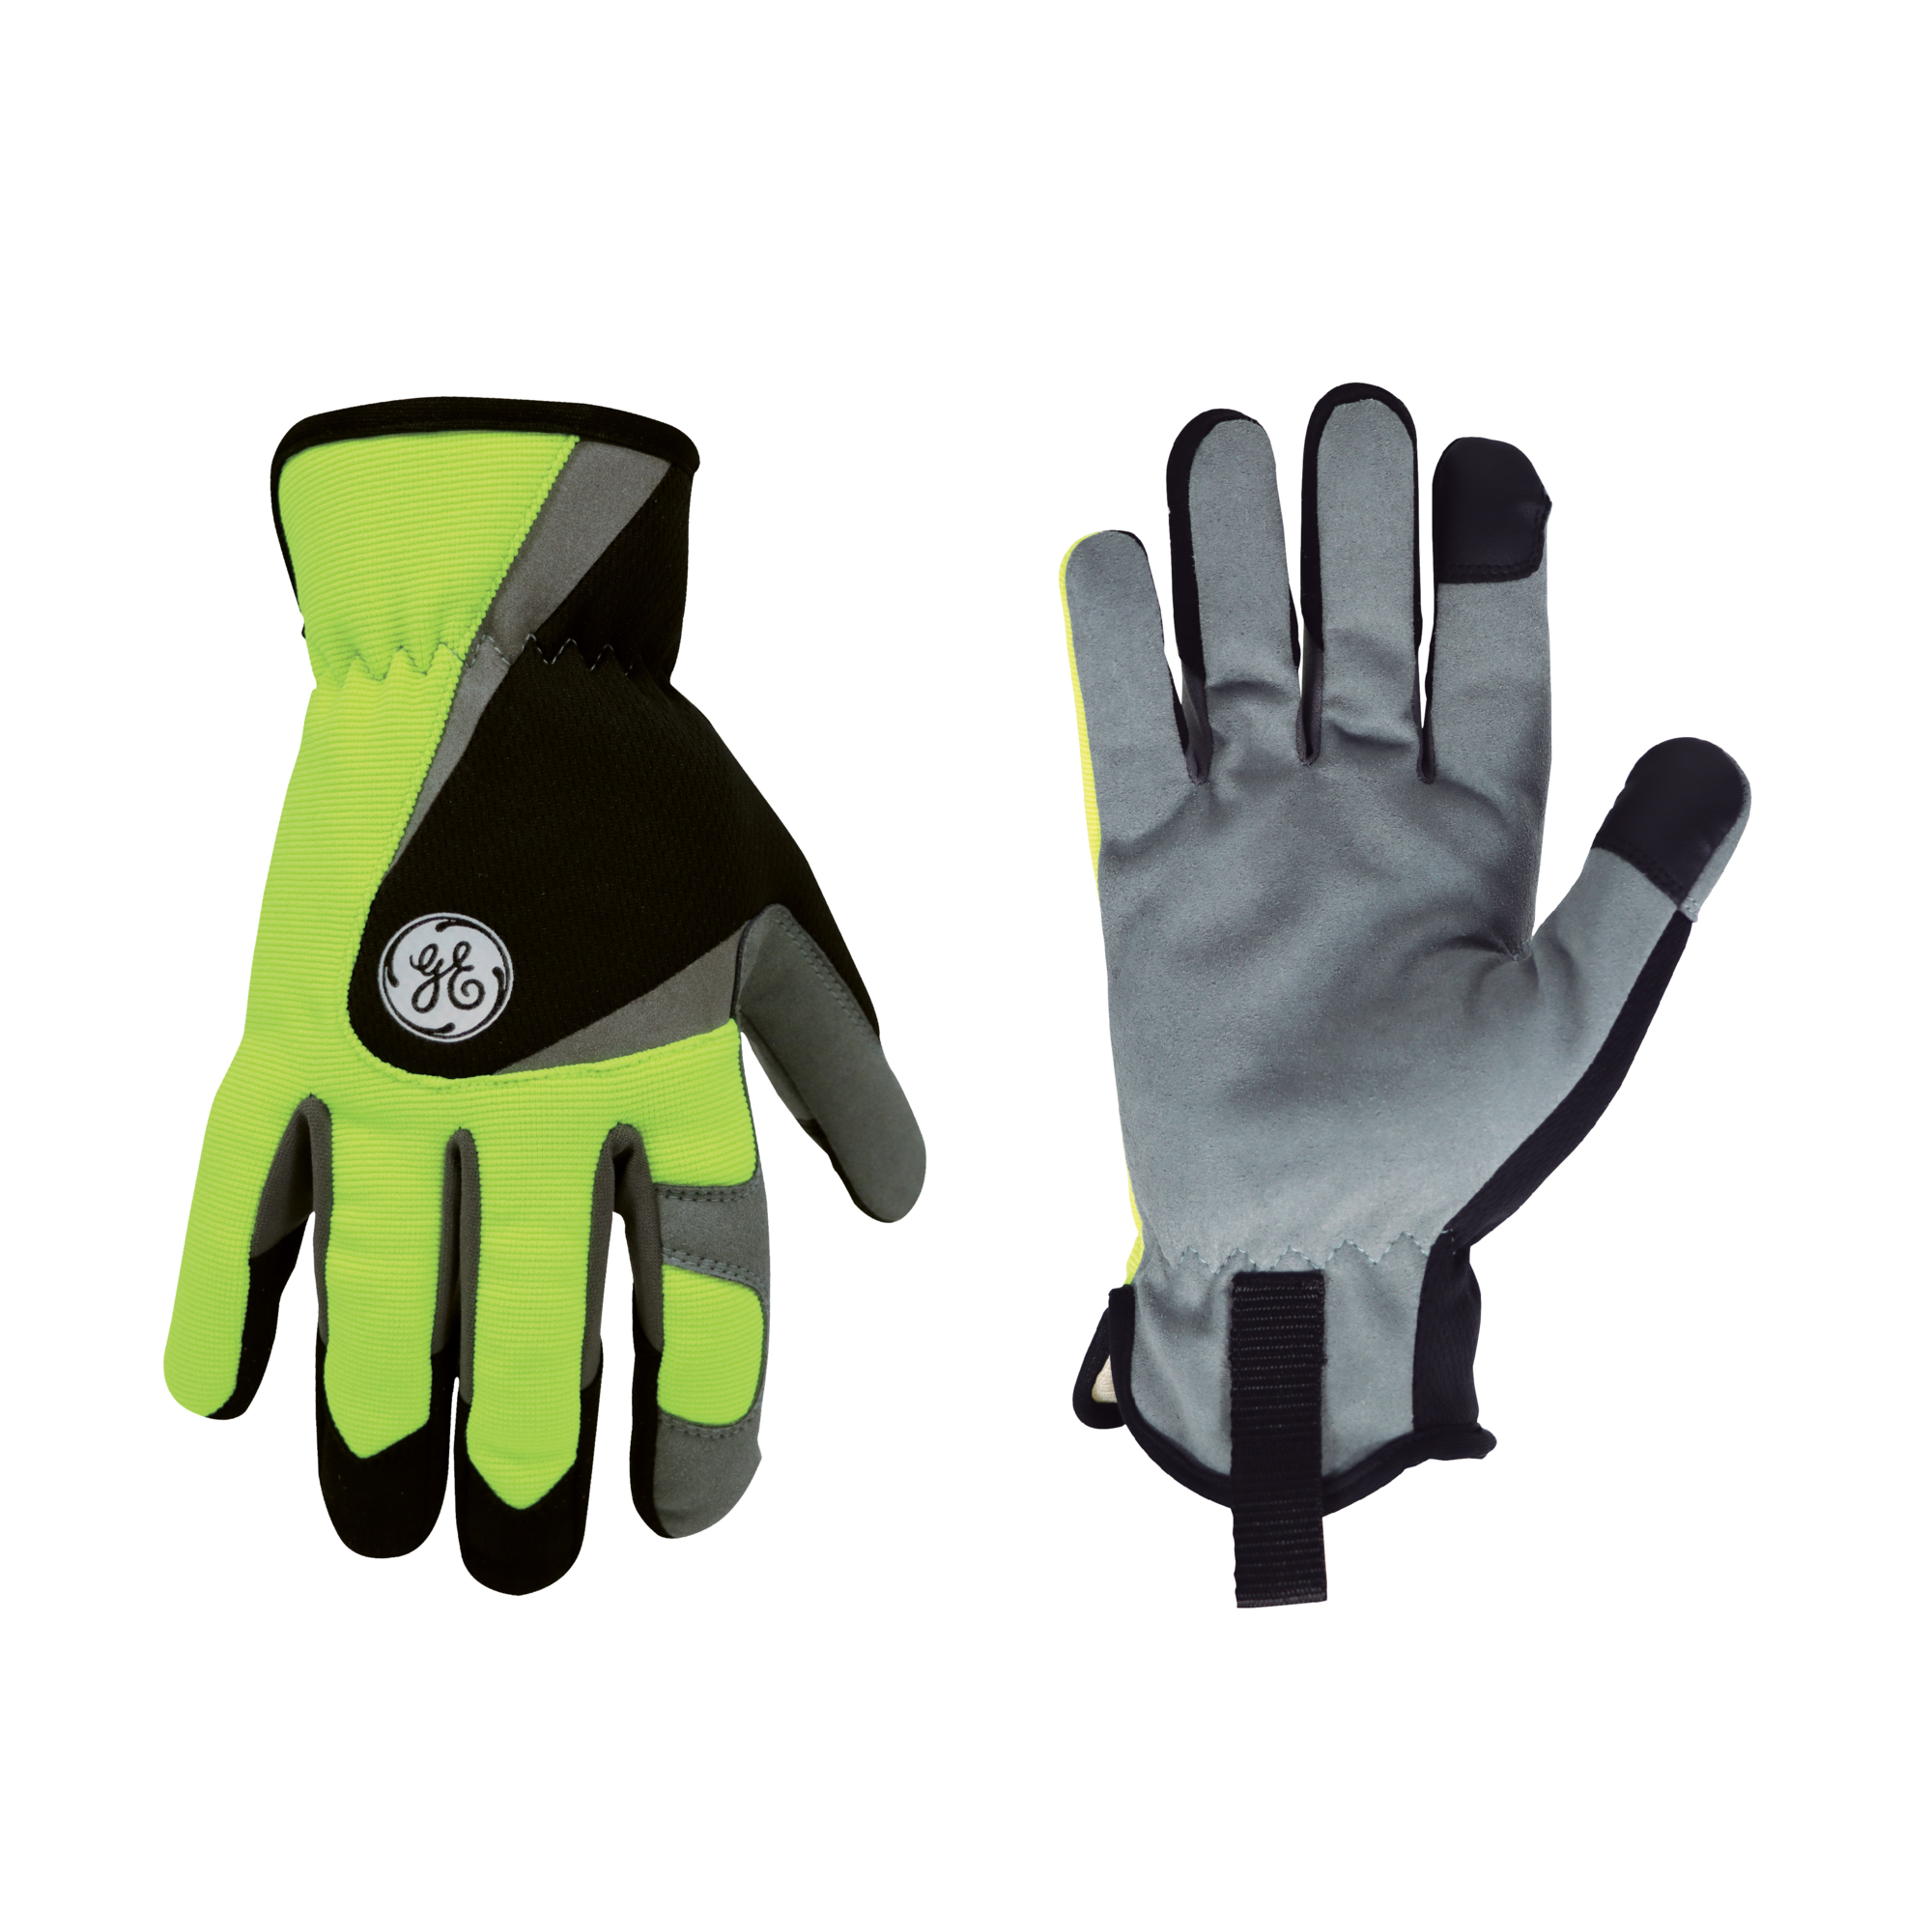 General Electric, Mechanic's Glove High-Vis Green M 1 pair, Size M, Included (qty.) 1, Model GG402MC